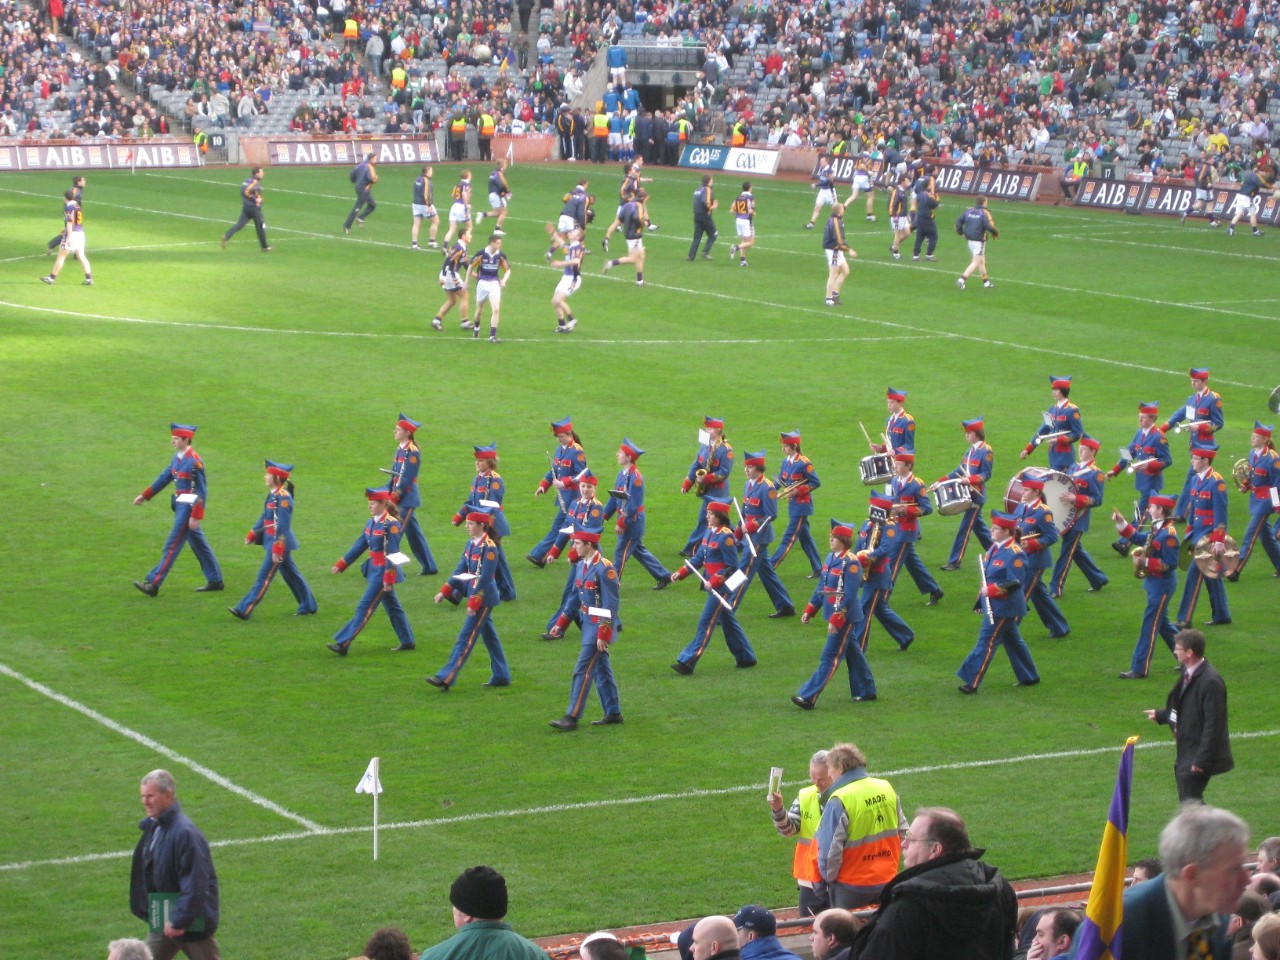 The Artane Band parade around Croke Park prior to the start of the 2009 All-Ireland Club Football Final. The band has been associated with GAA events since its first performance at an early GAA tournament in 1886.